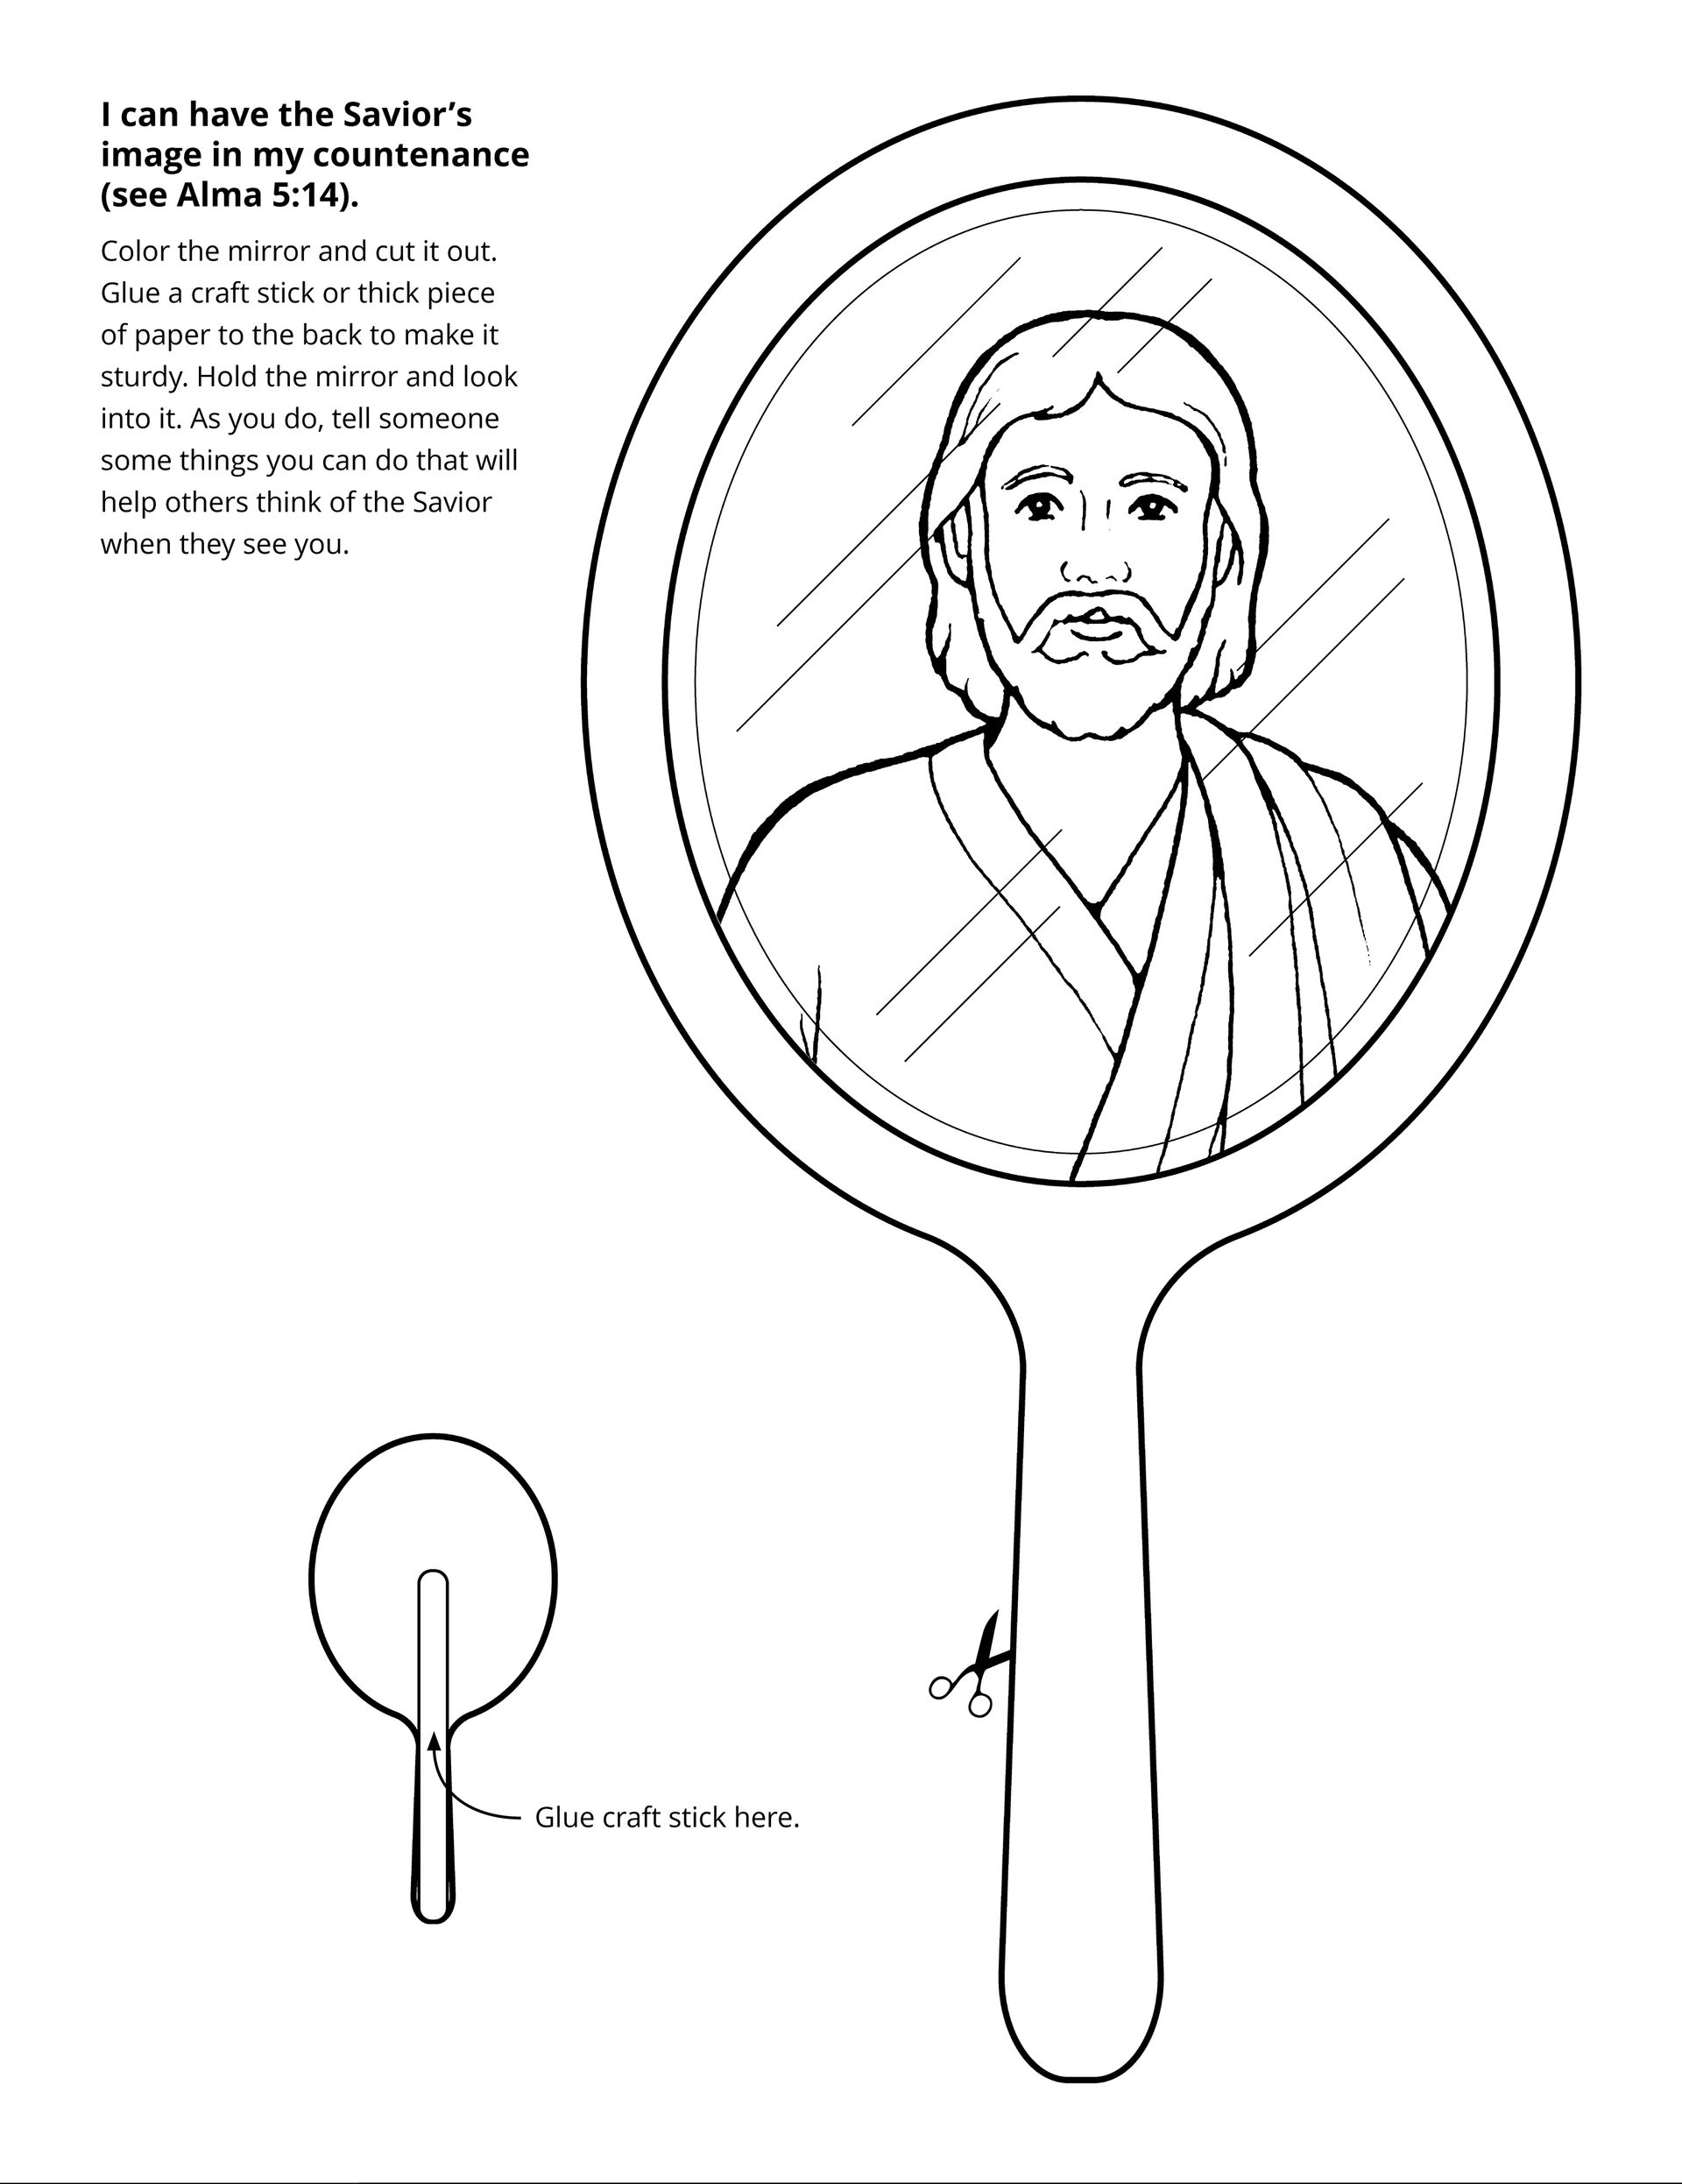 Line art of the Savior’s image in a mirror.